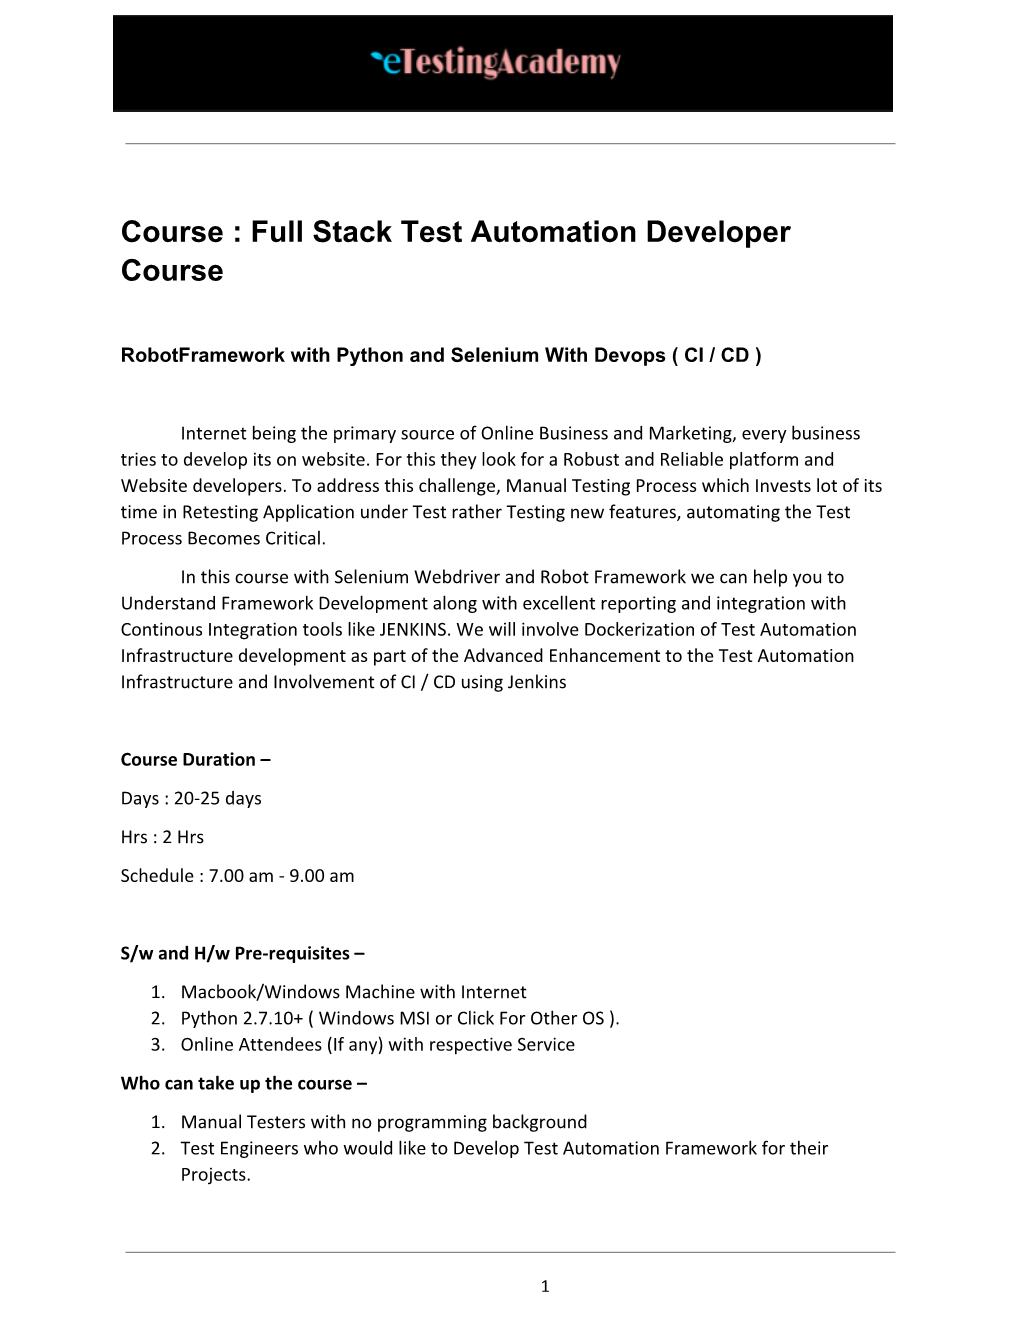 Full Stack Test Automation Developer Course